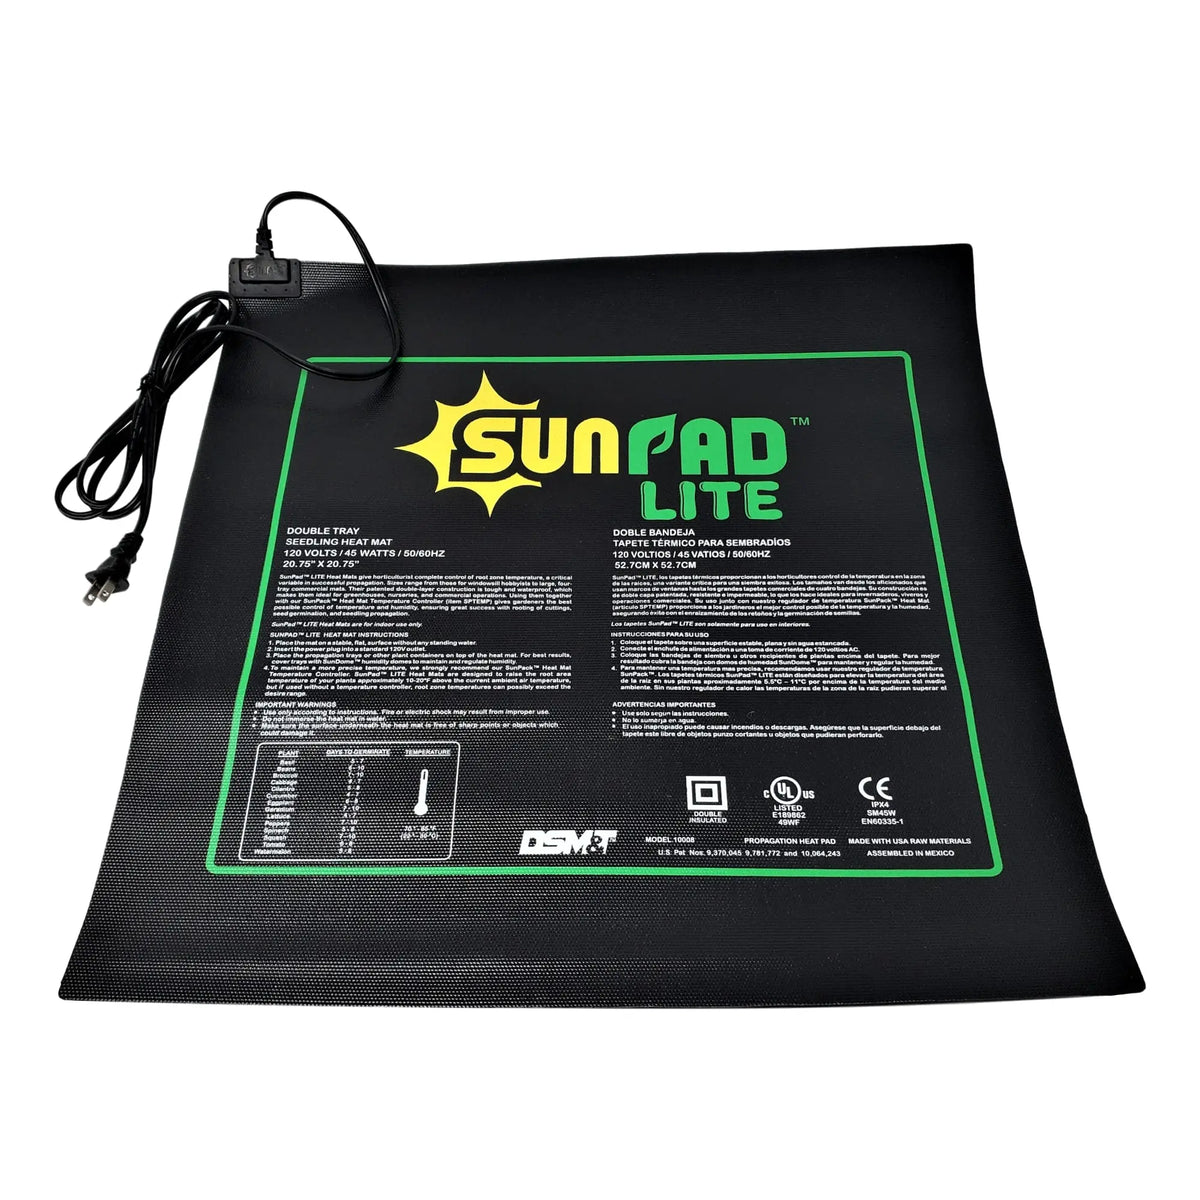 Johnny's Commercial Heat Mat – Master